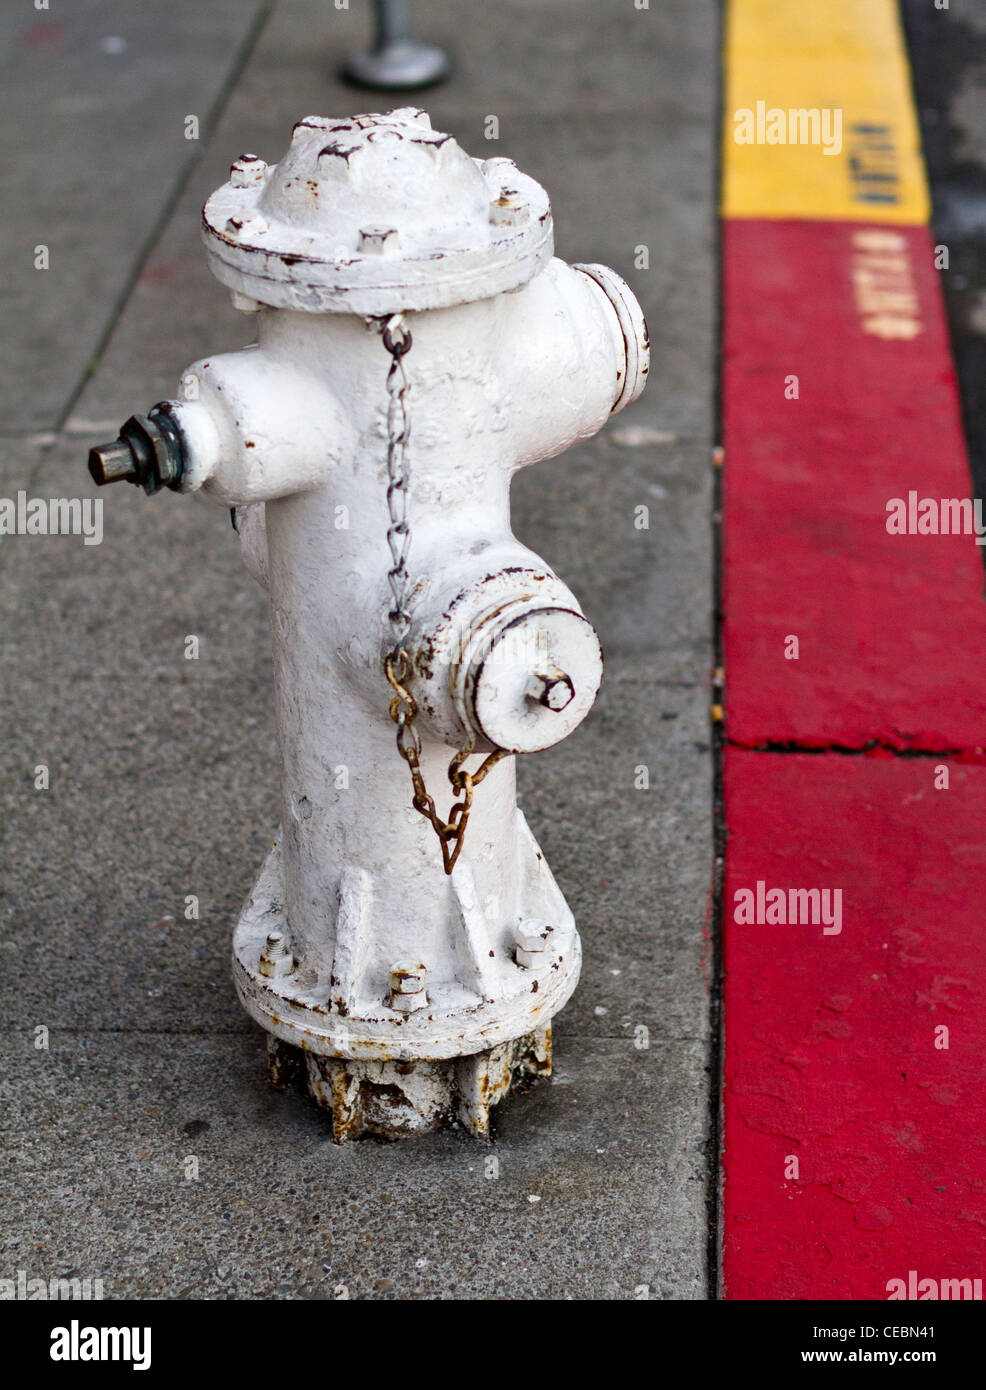 A San Francisco fire hydrant standing by a yellow and red painted kerb Stock Photo